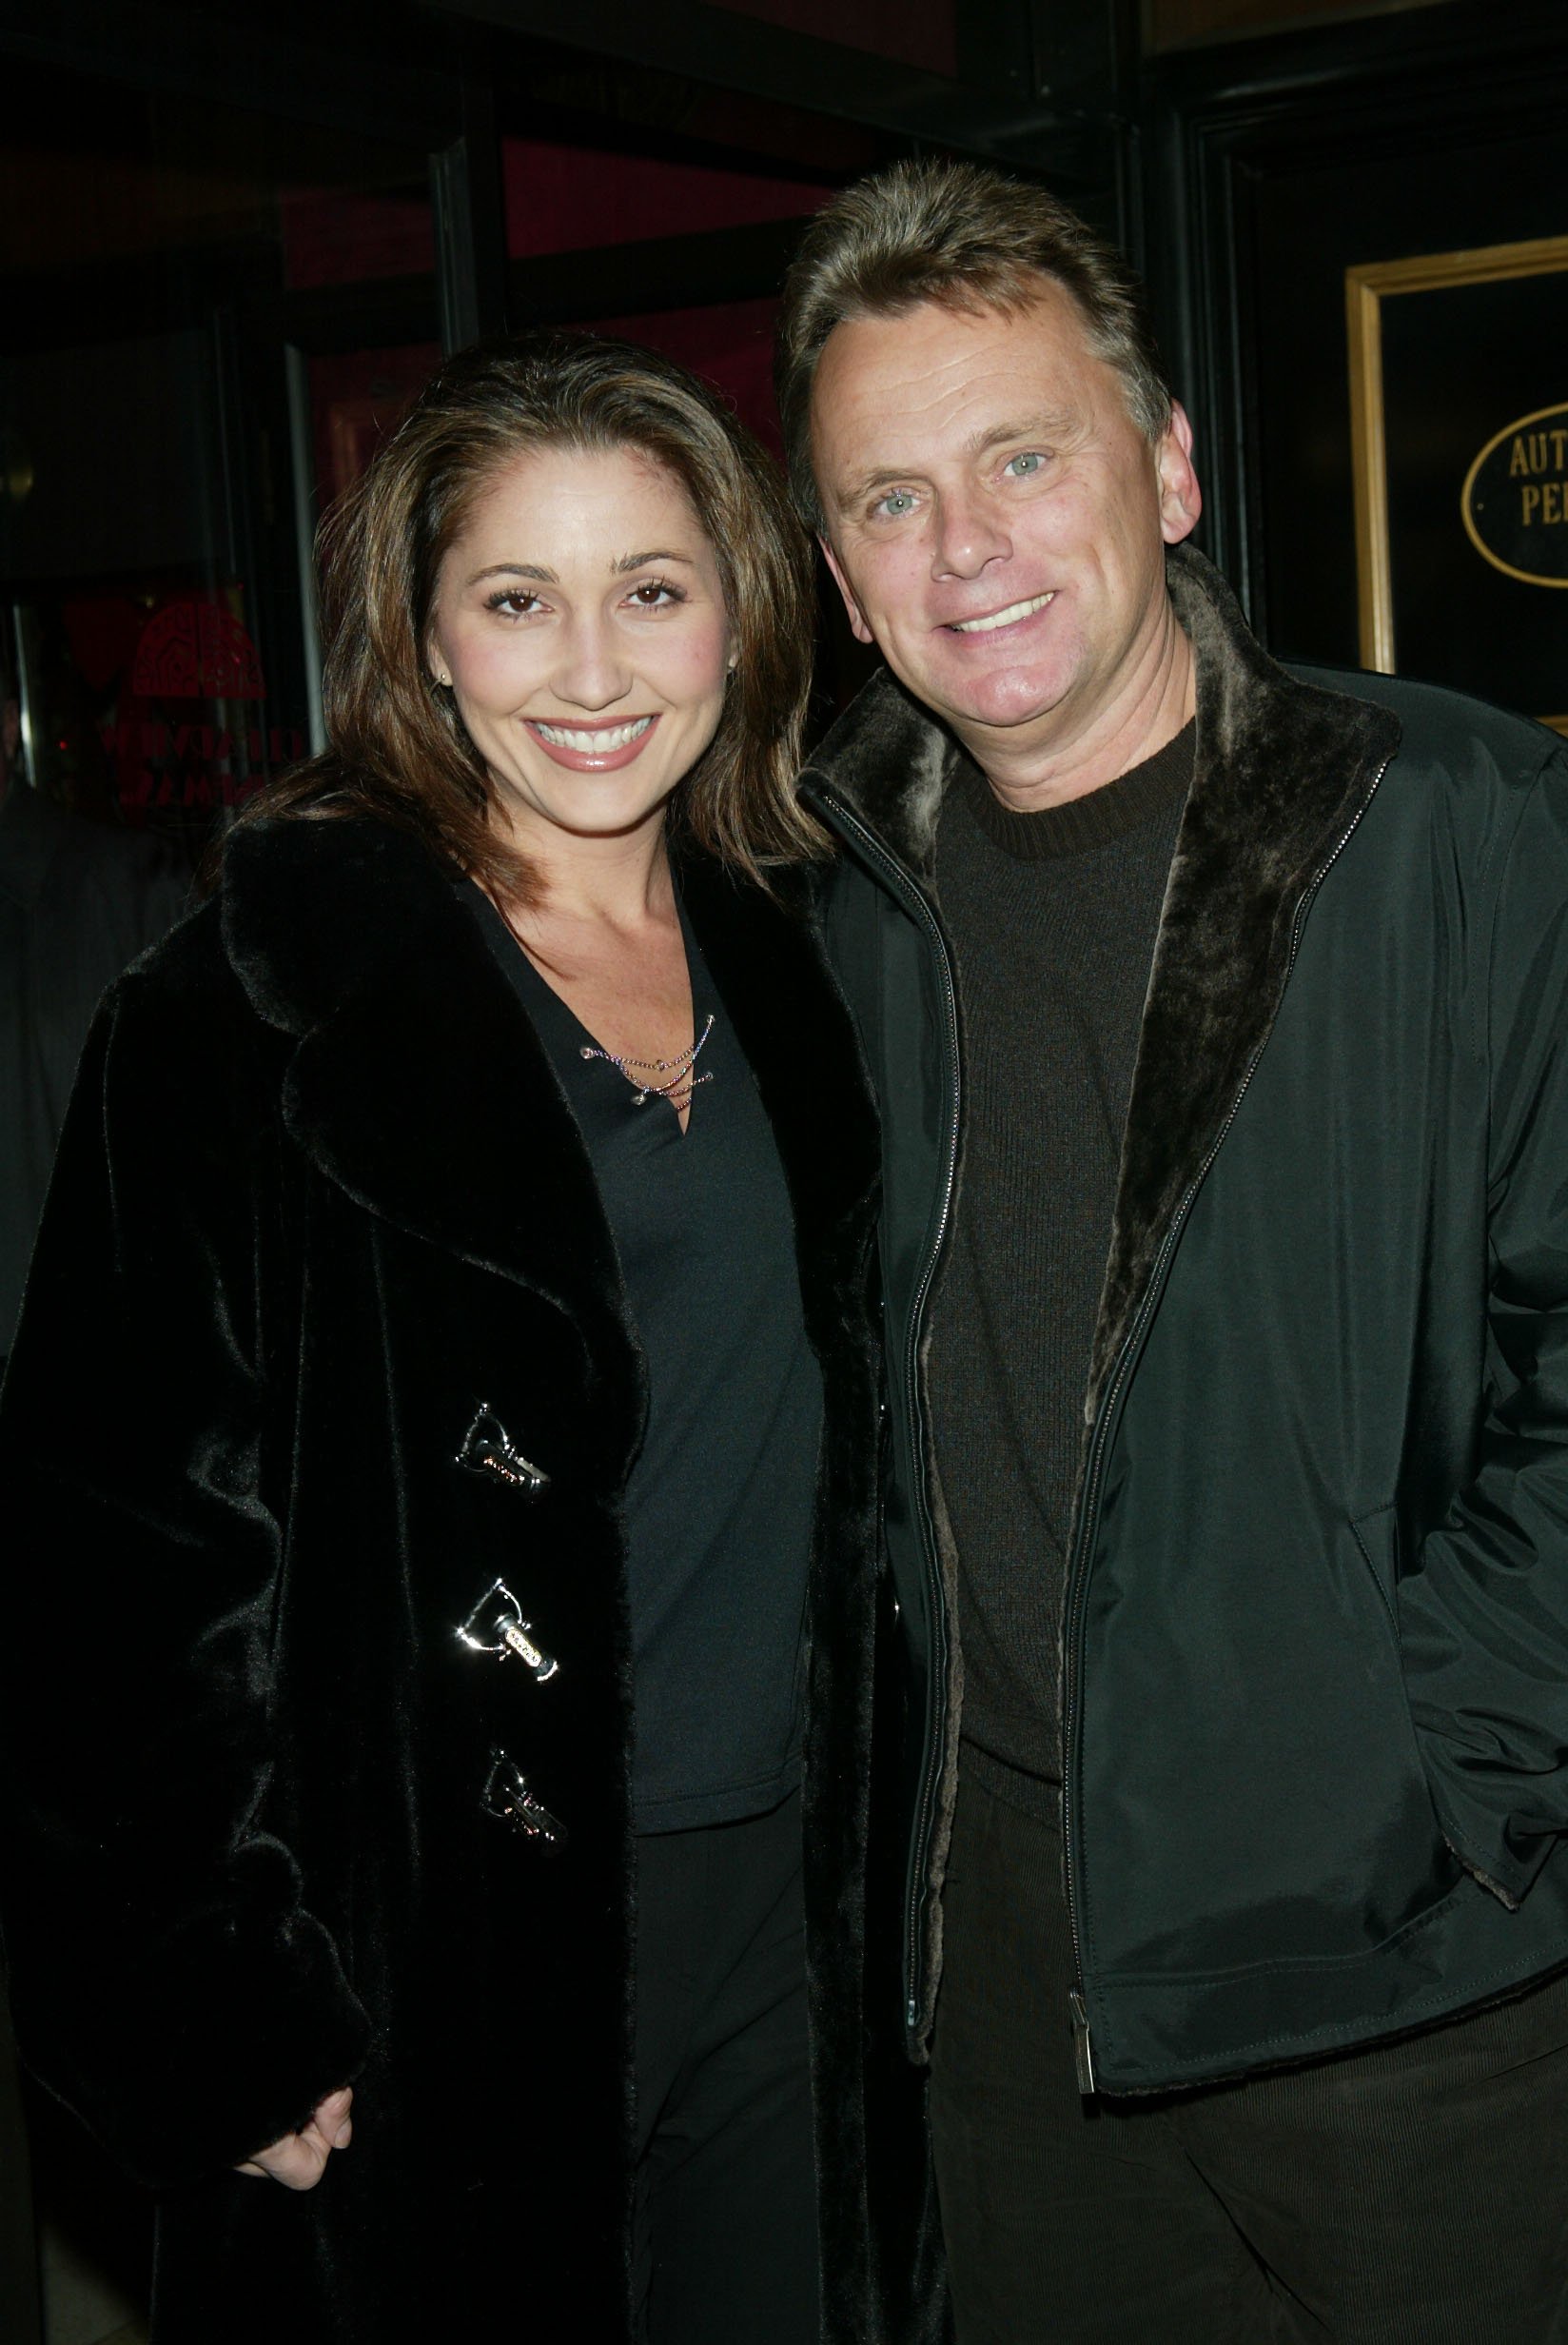 Pat Sajak at the "Maid In Manhattan" world premiere at The Ziegfeld Theatre, in New York City on December 8, 2002. | Source: Getty Images